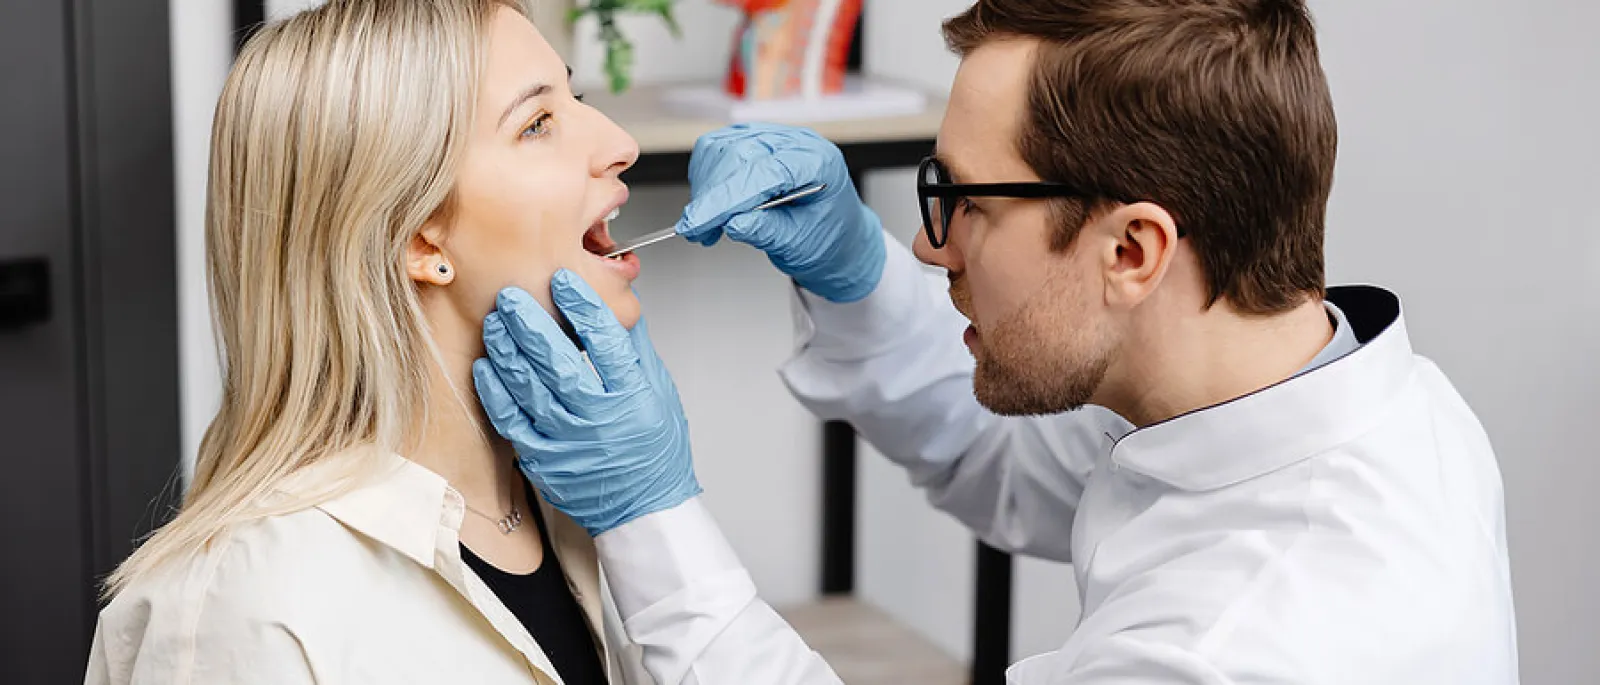 Preparing for Soft Palate Coblation: What Patients Should Know Before the Procedure